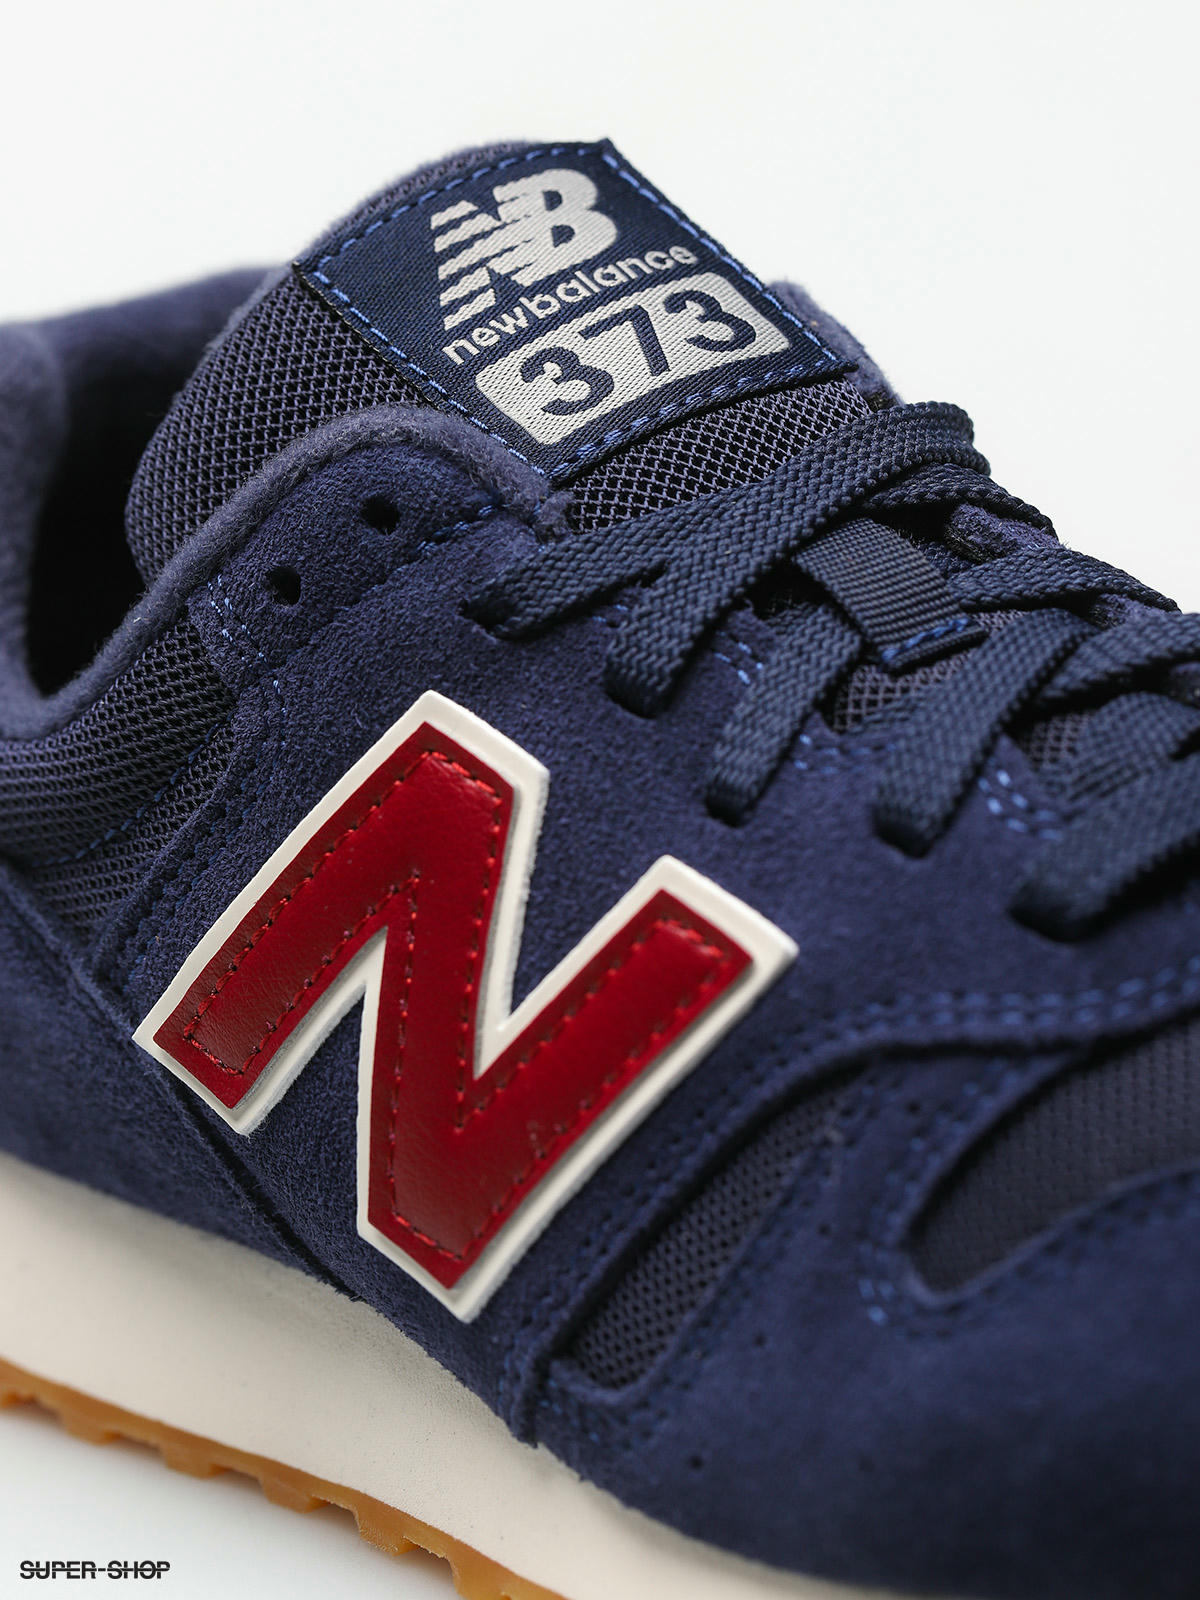 new balance 373 navy and red